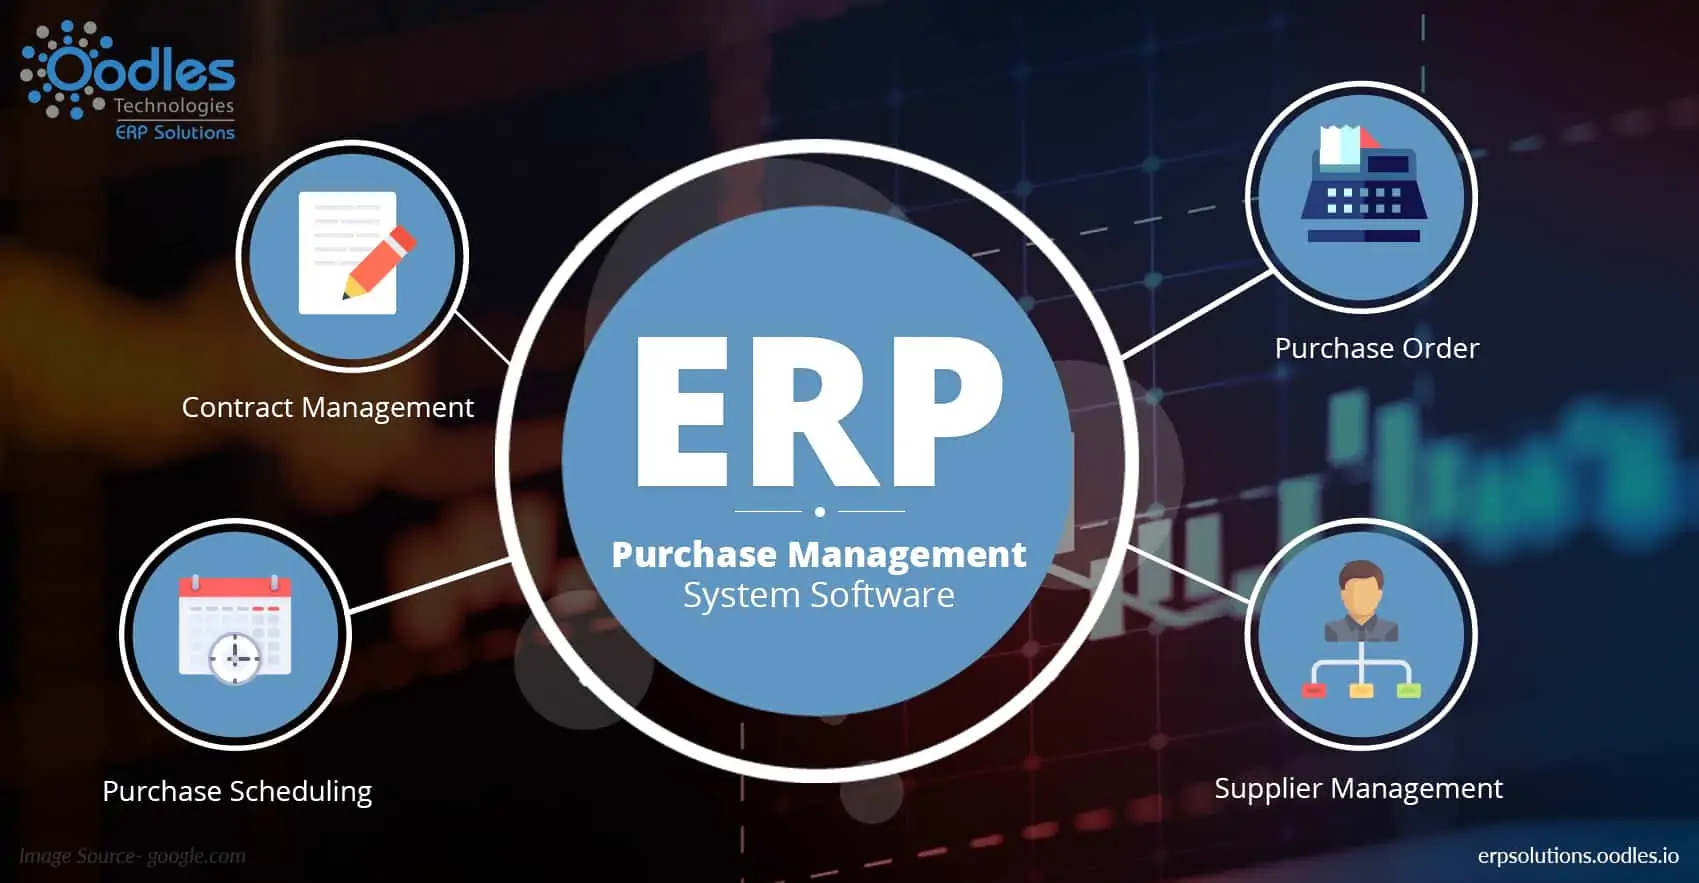 Synergise with ERP purchase management system software